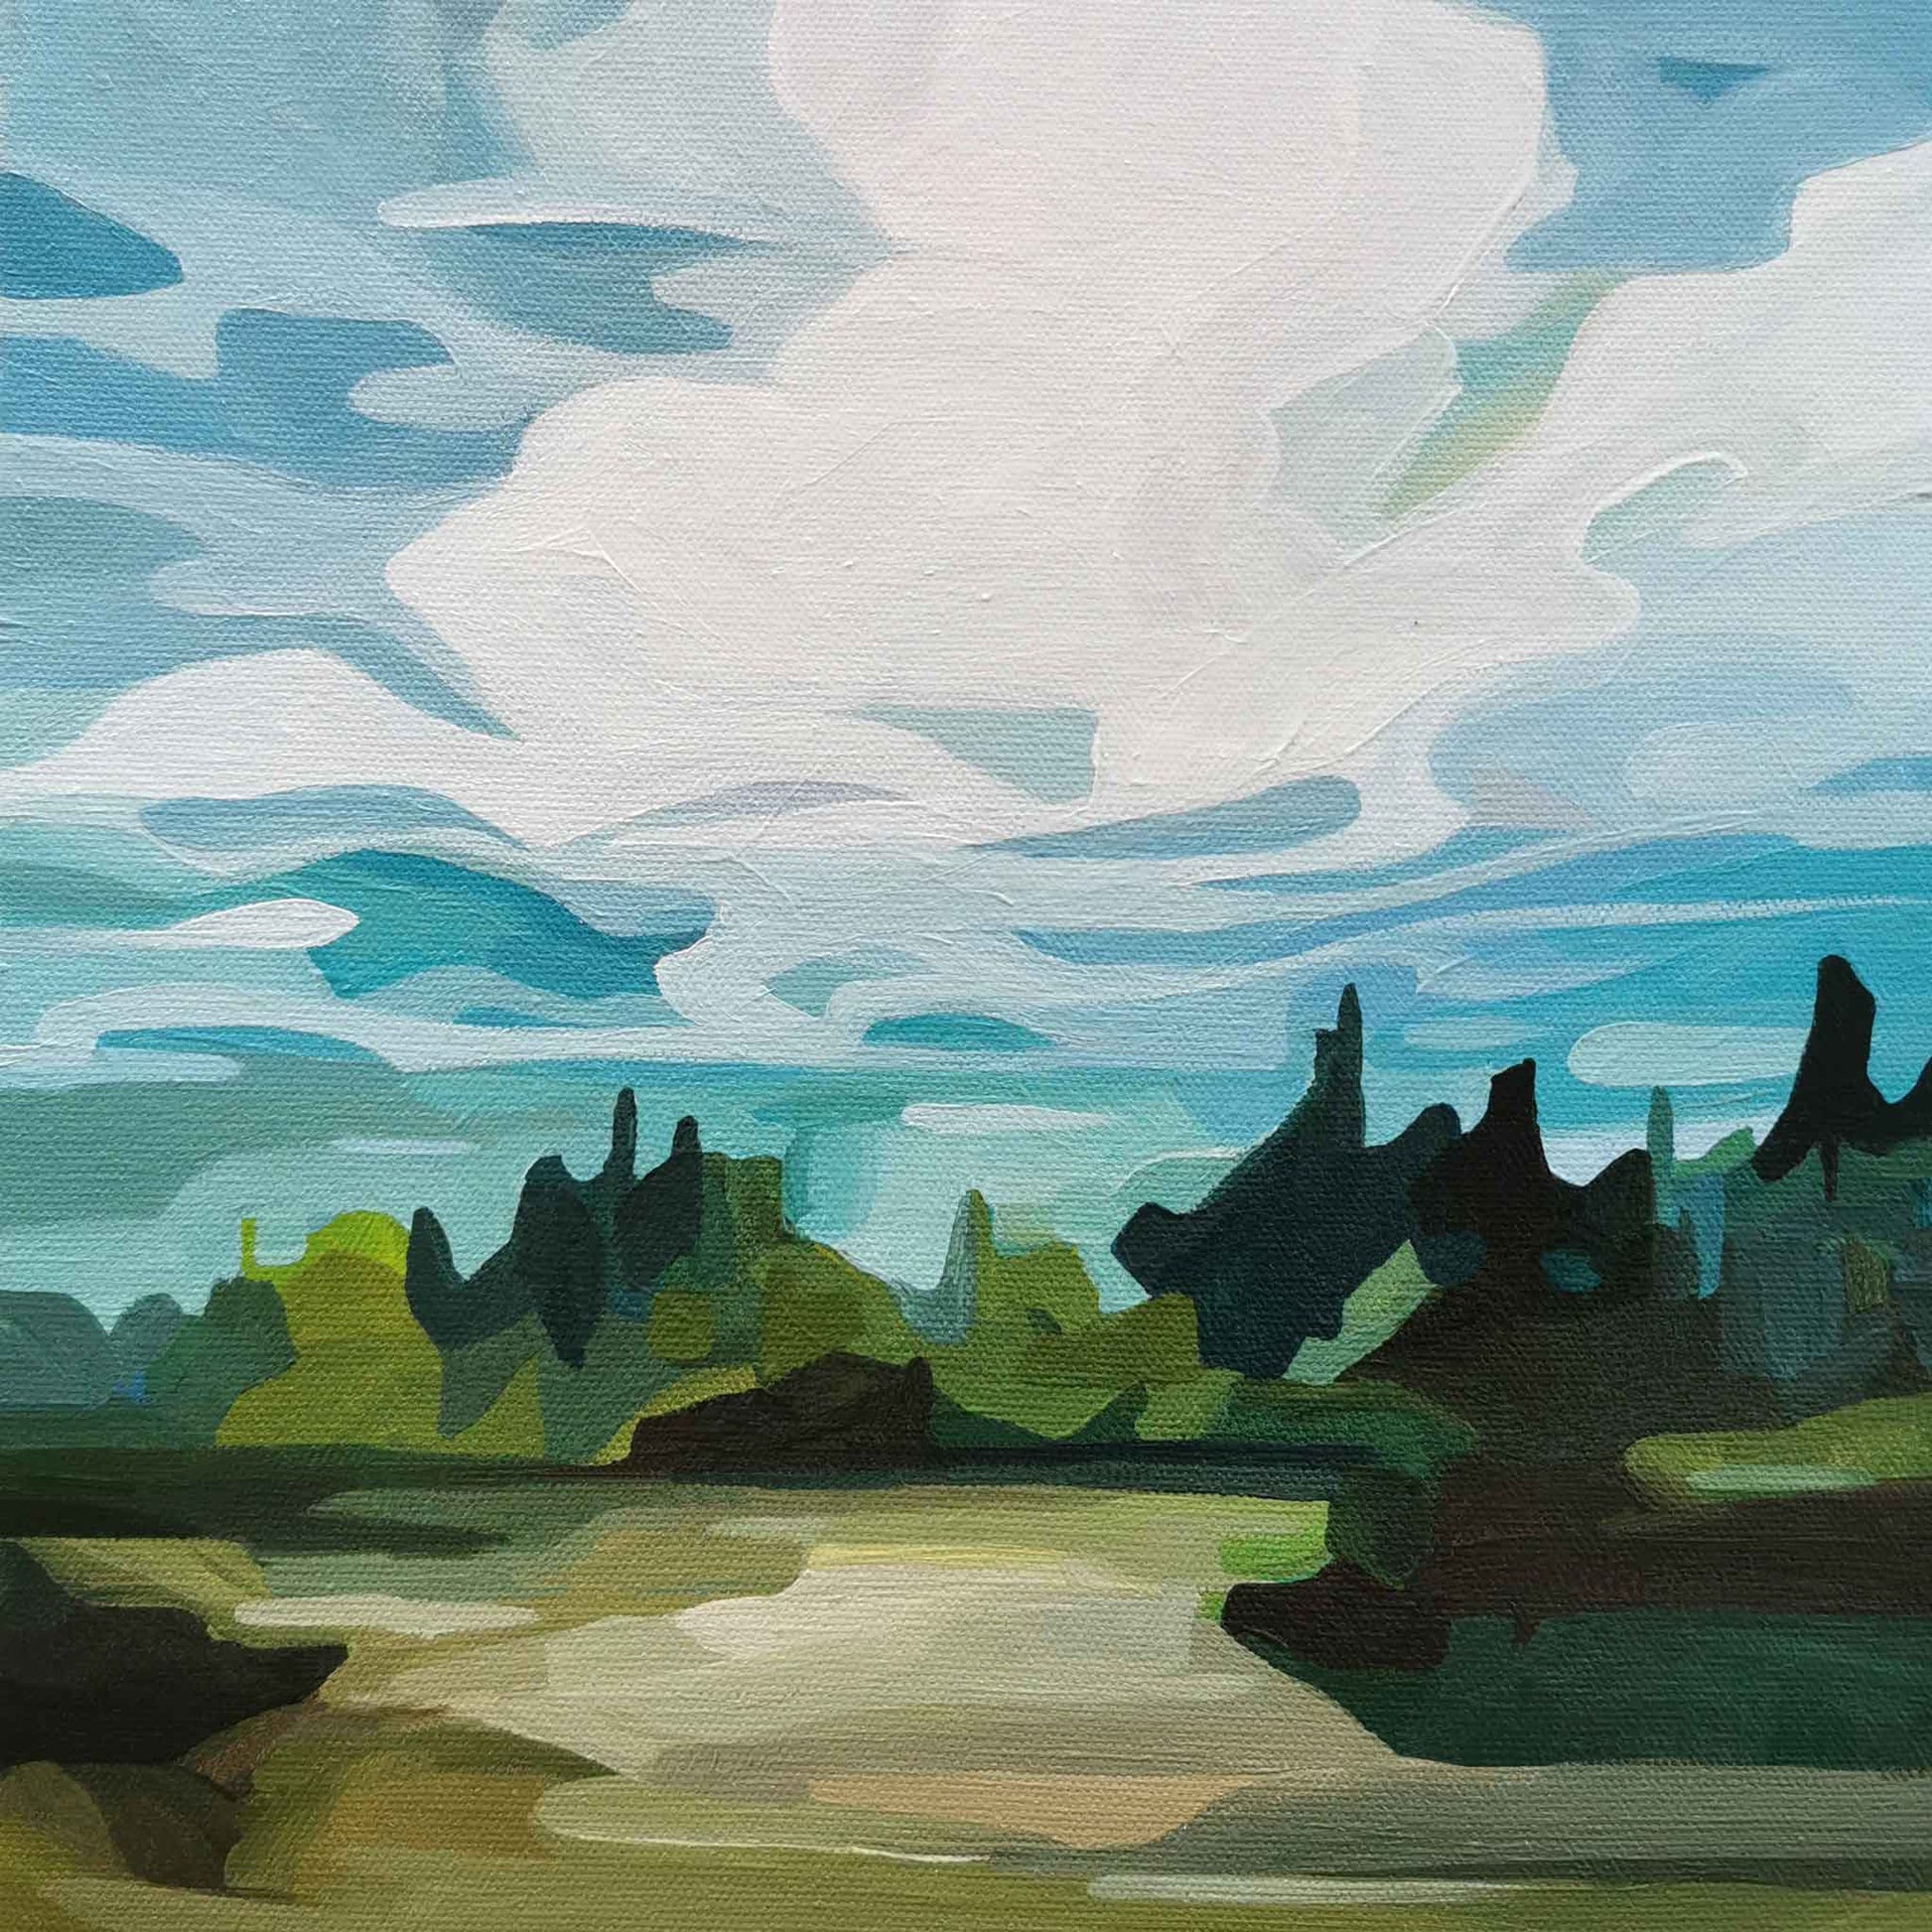 acrylic sky painting of an abstract skyscape above a forest